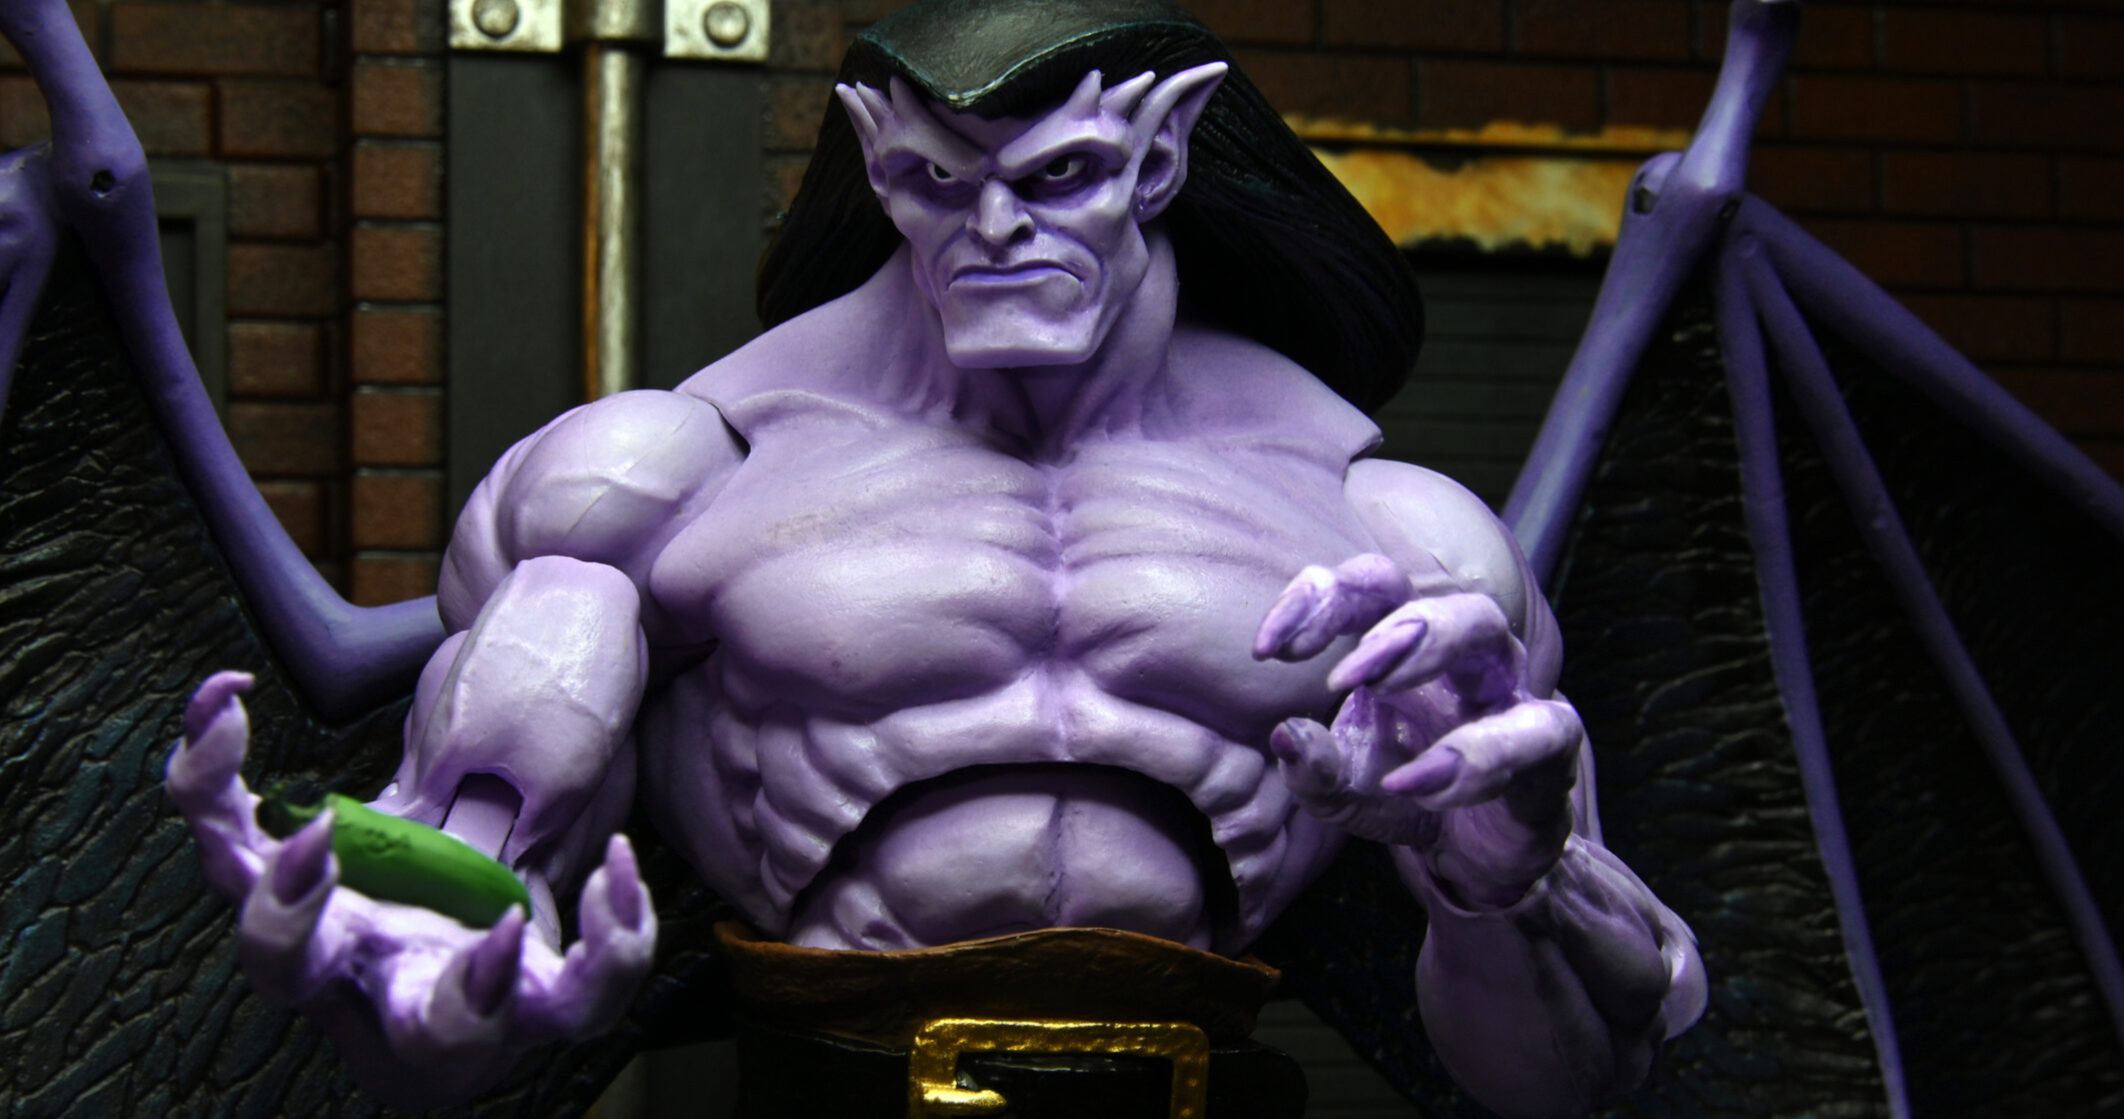 Gargoyles Gets an Ultimate Goliath Action Figure from NECA